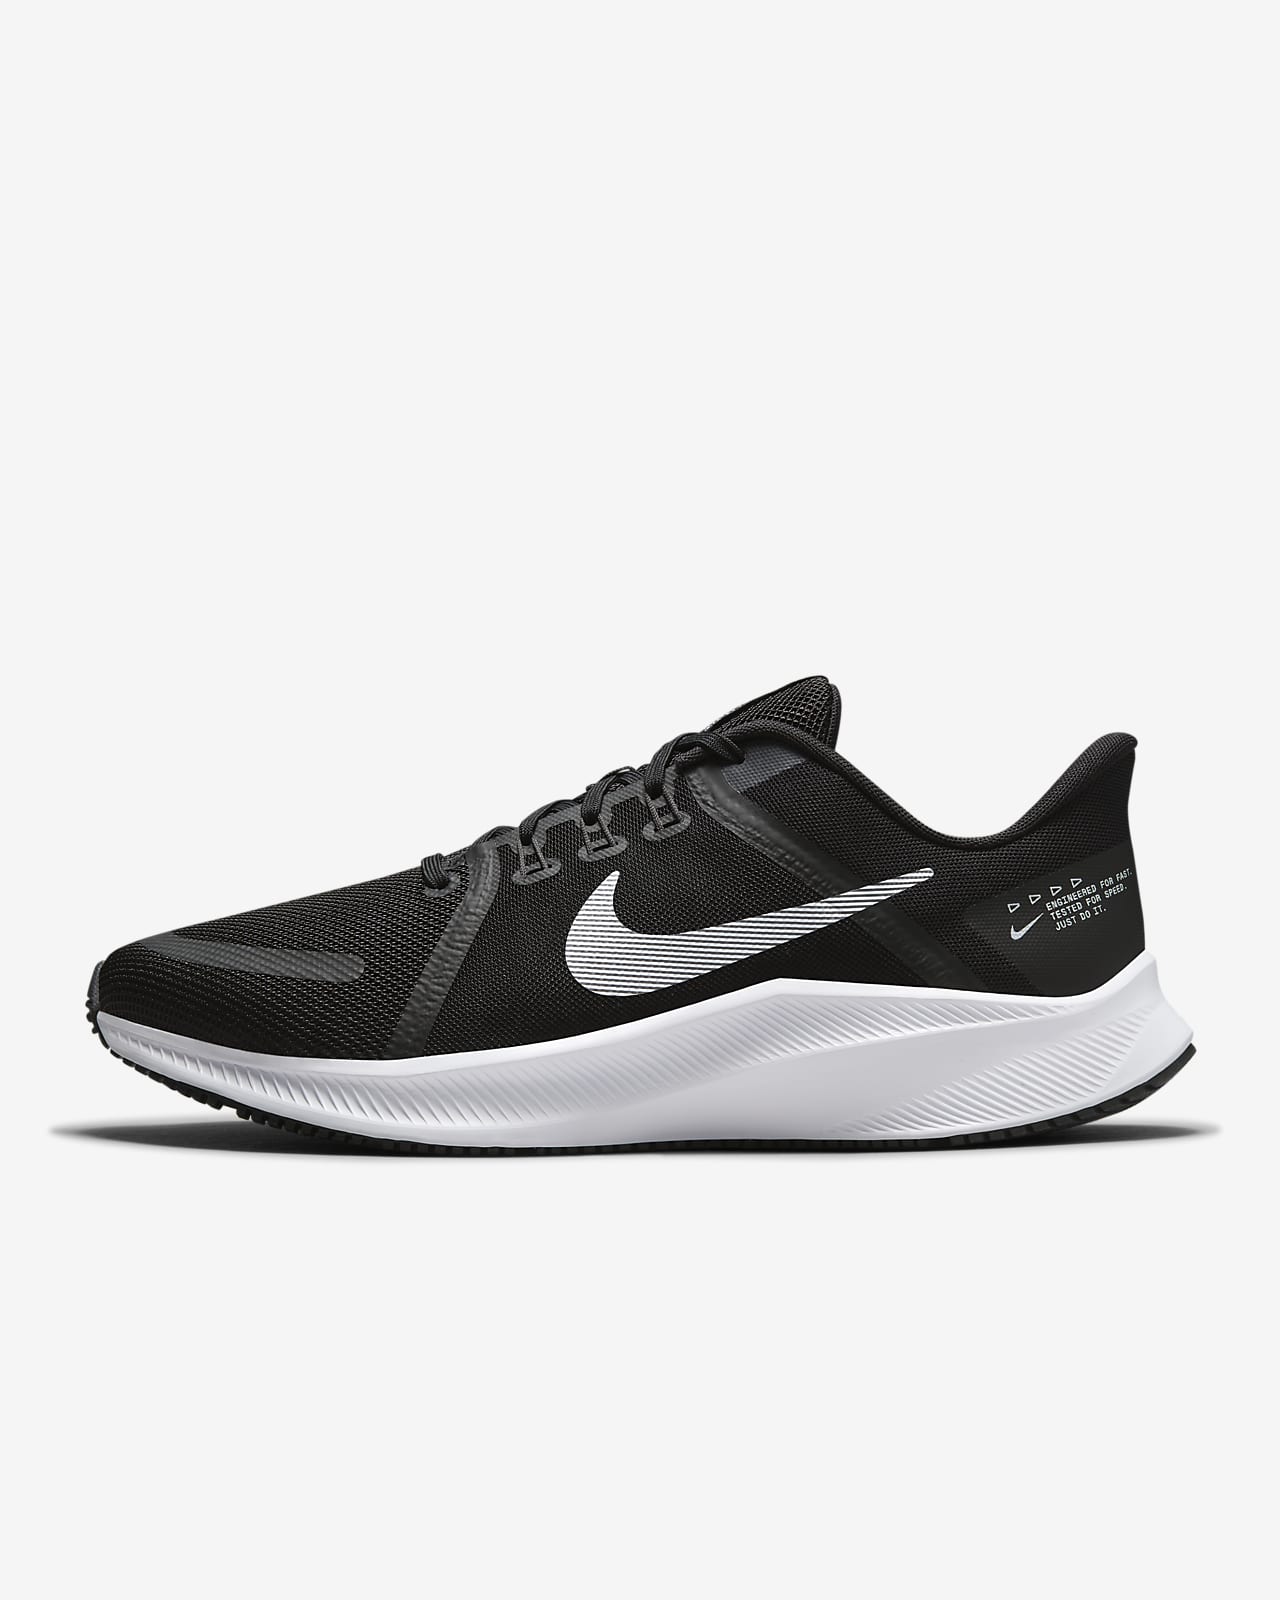 Nike Quest Men's Road Running Shoes.